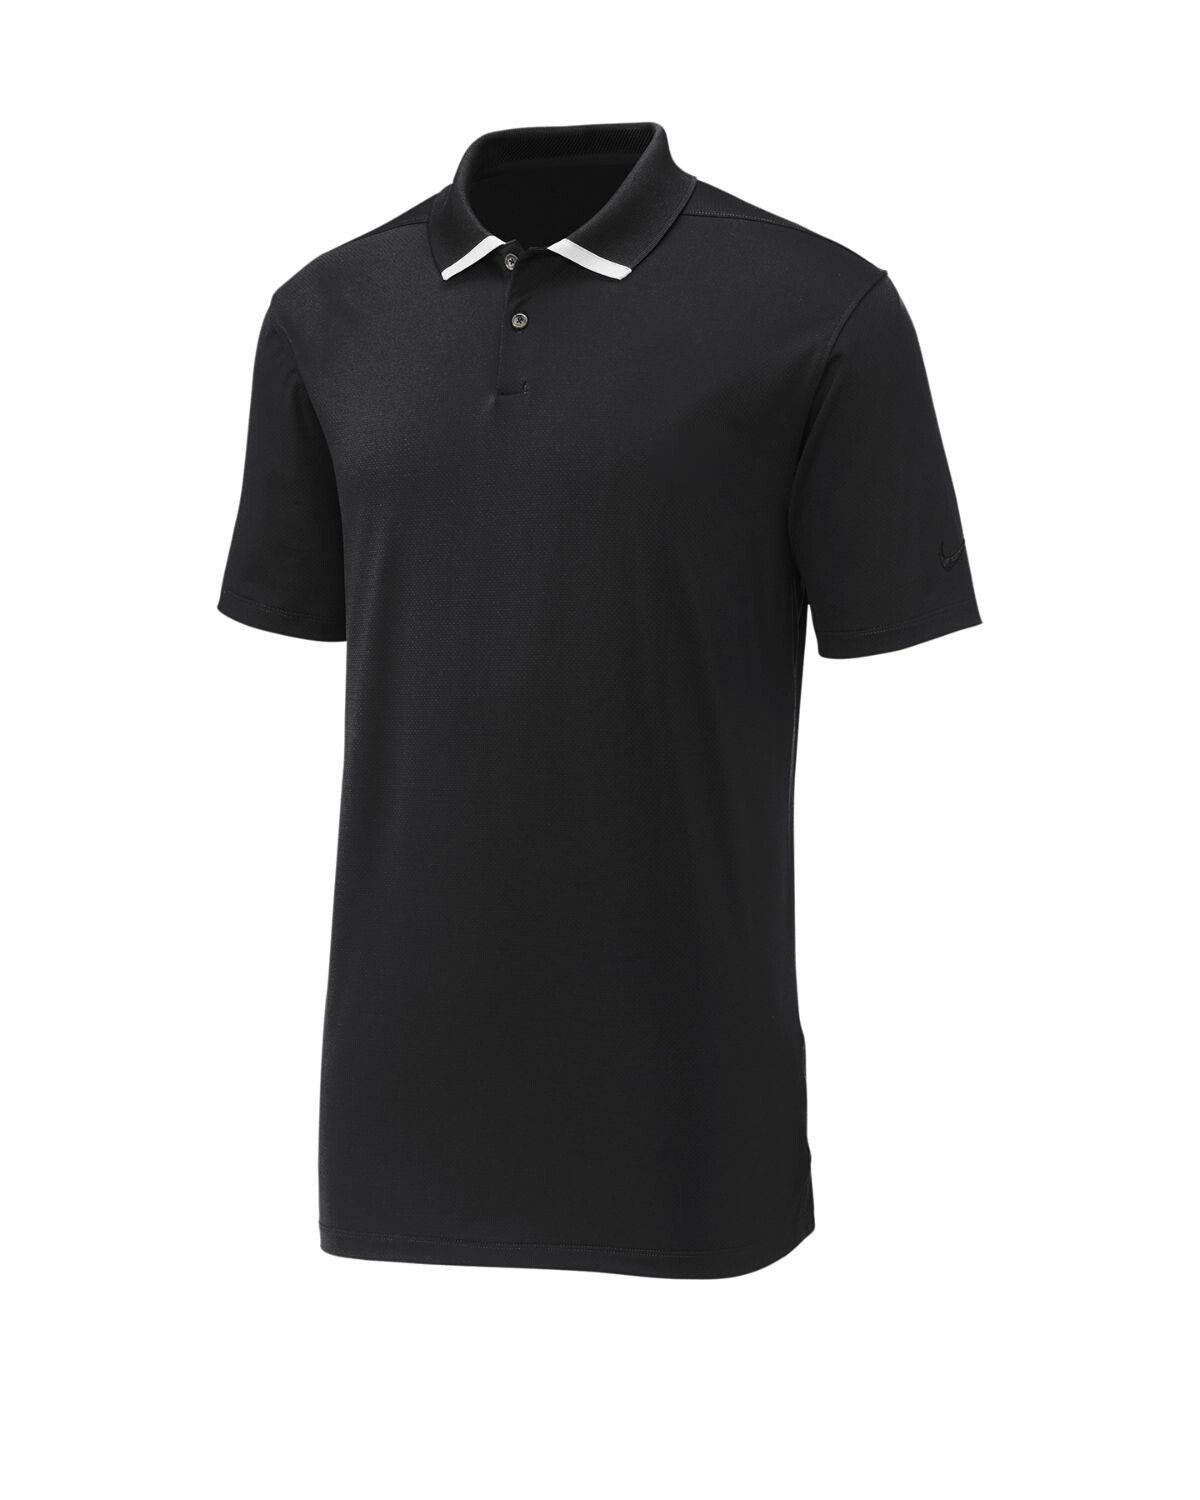 NKDC2114 Dri-FIT Vapor Block Polo custom embroidered or printed with your  logo.